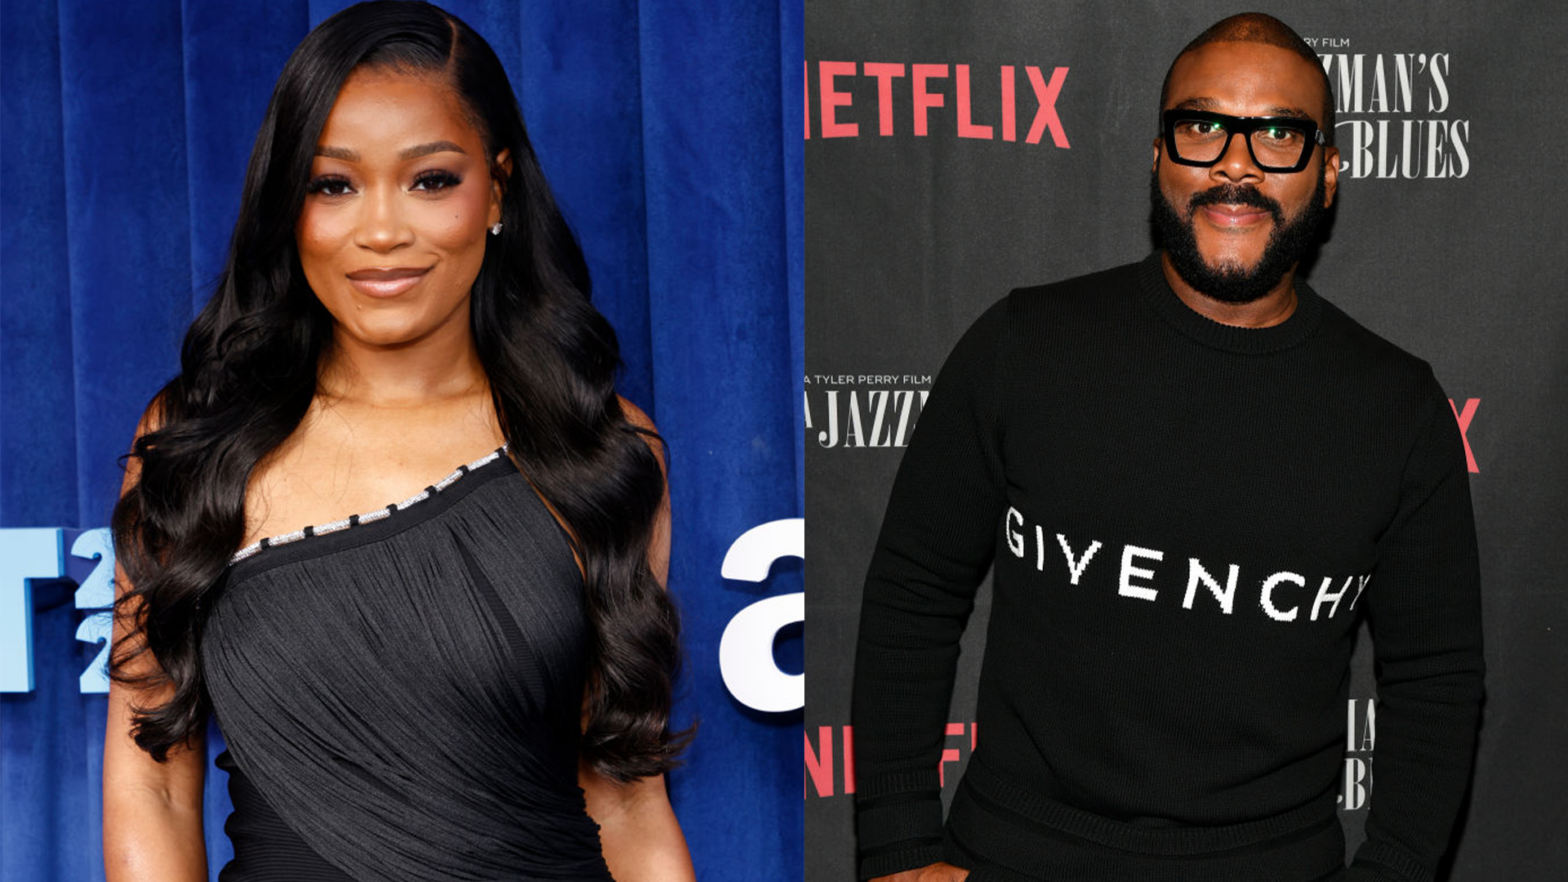 Keke Palmer Thanks Billionaire Tyler Perry For Paying Her Extra Money On The Backend That Provided Financially For Herself And Her Family When They Had ‘Nothing’